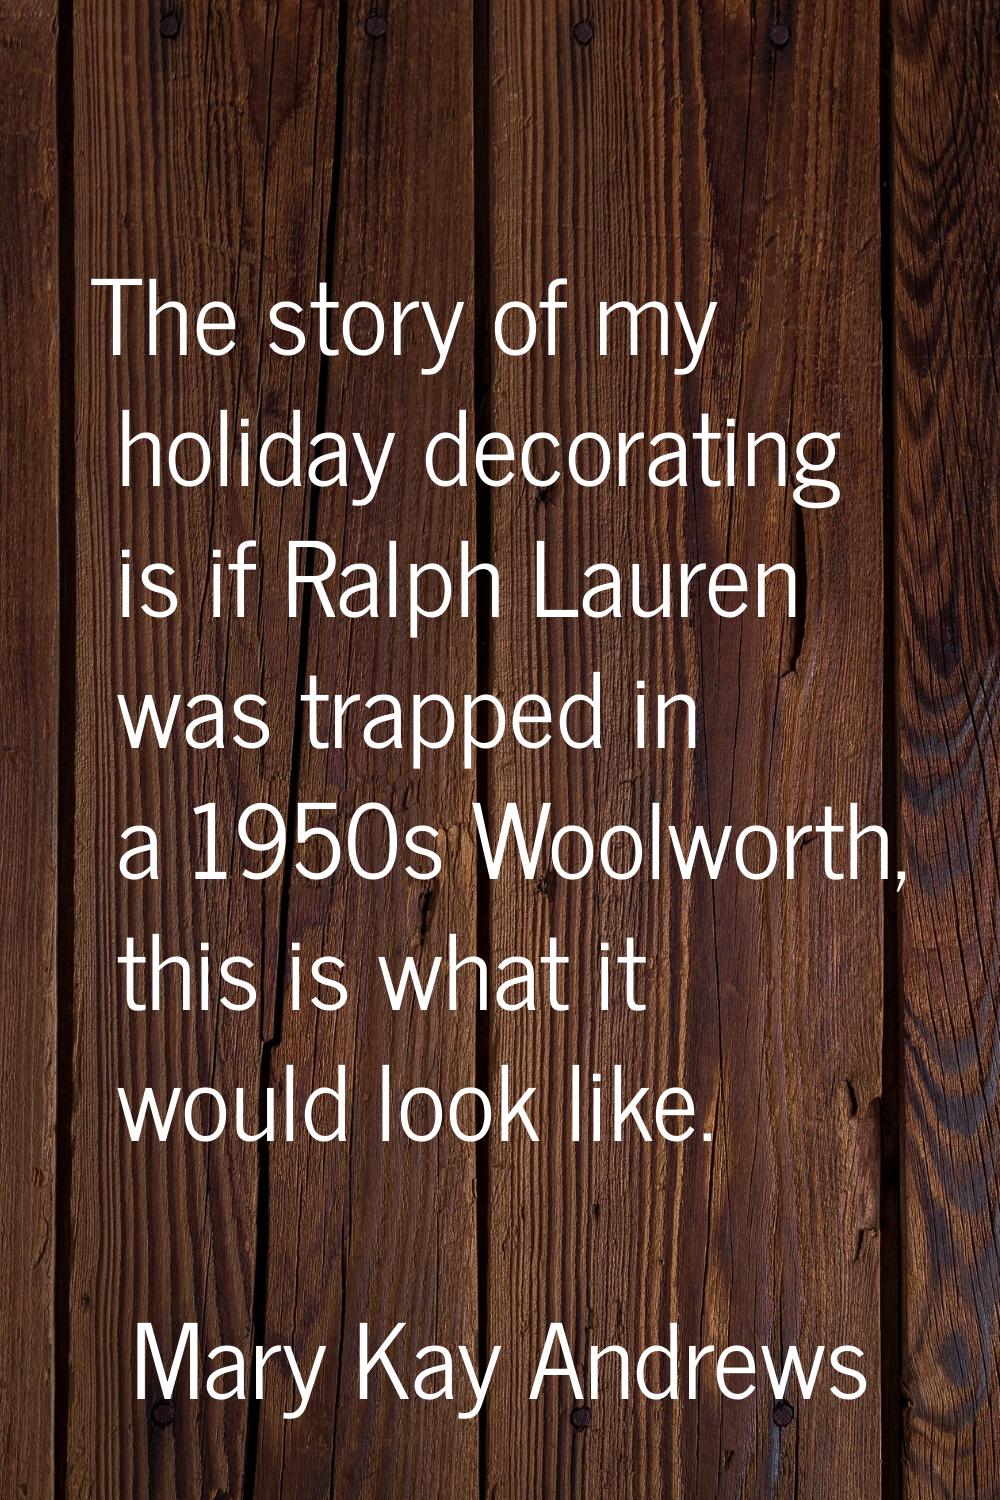 The story of my holiday decorating is if Ralph Lauren was trapped in a 1950s Woolworth, this is wha